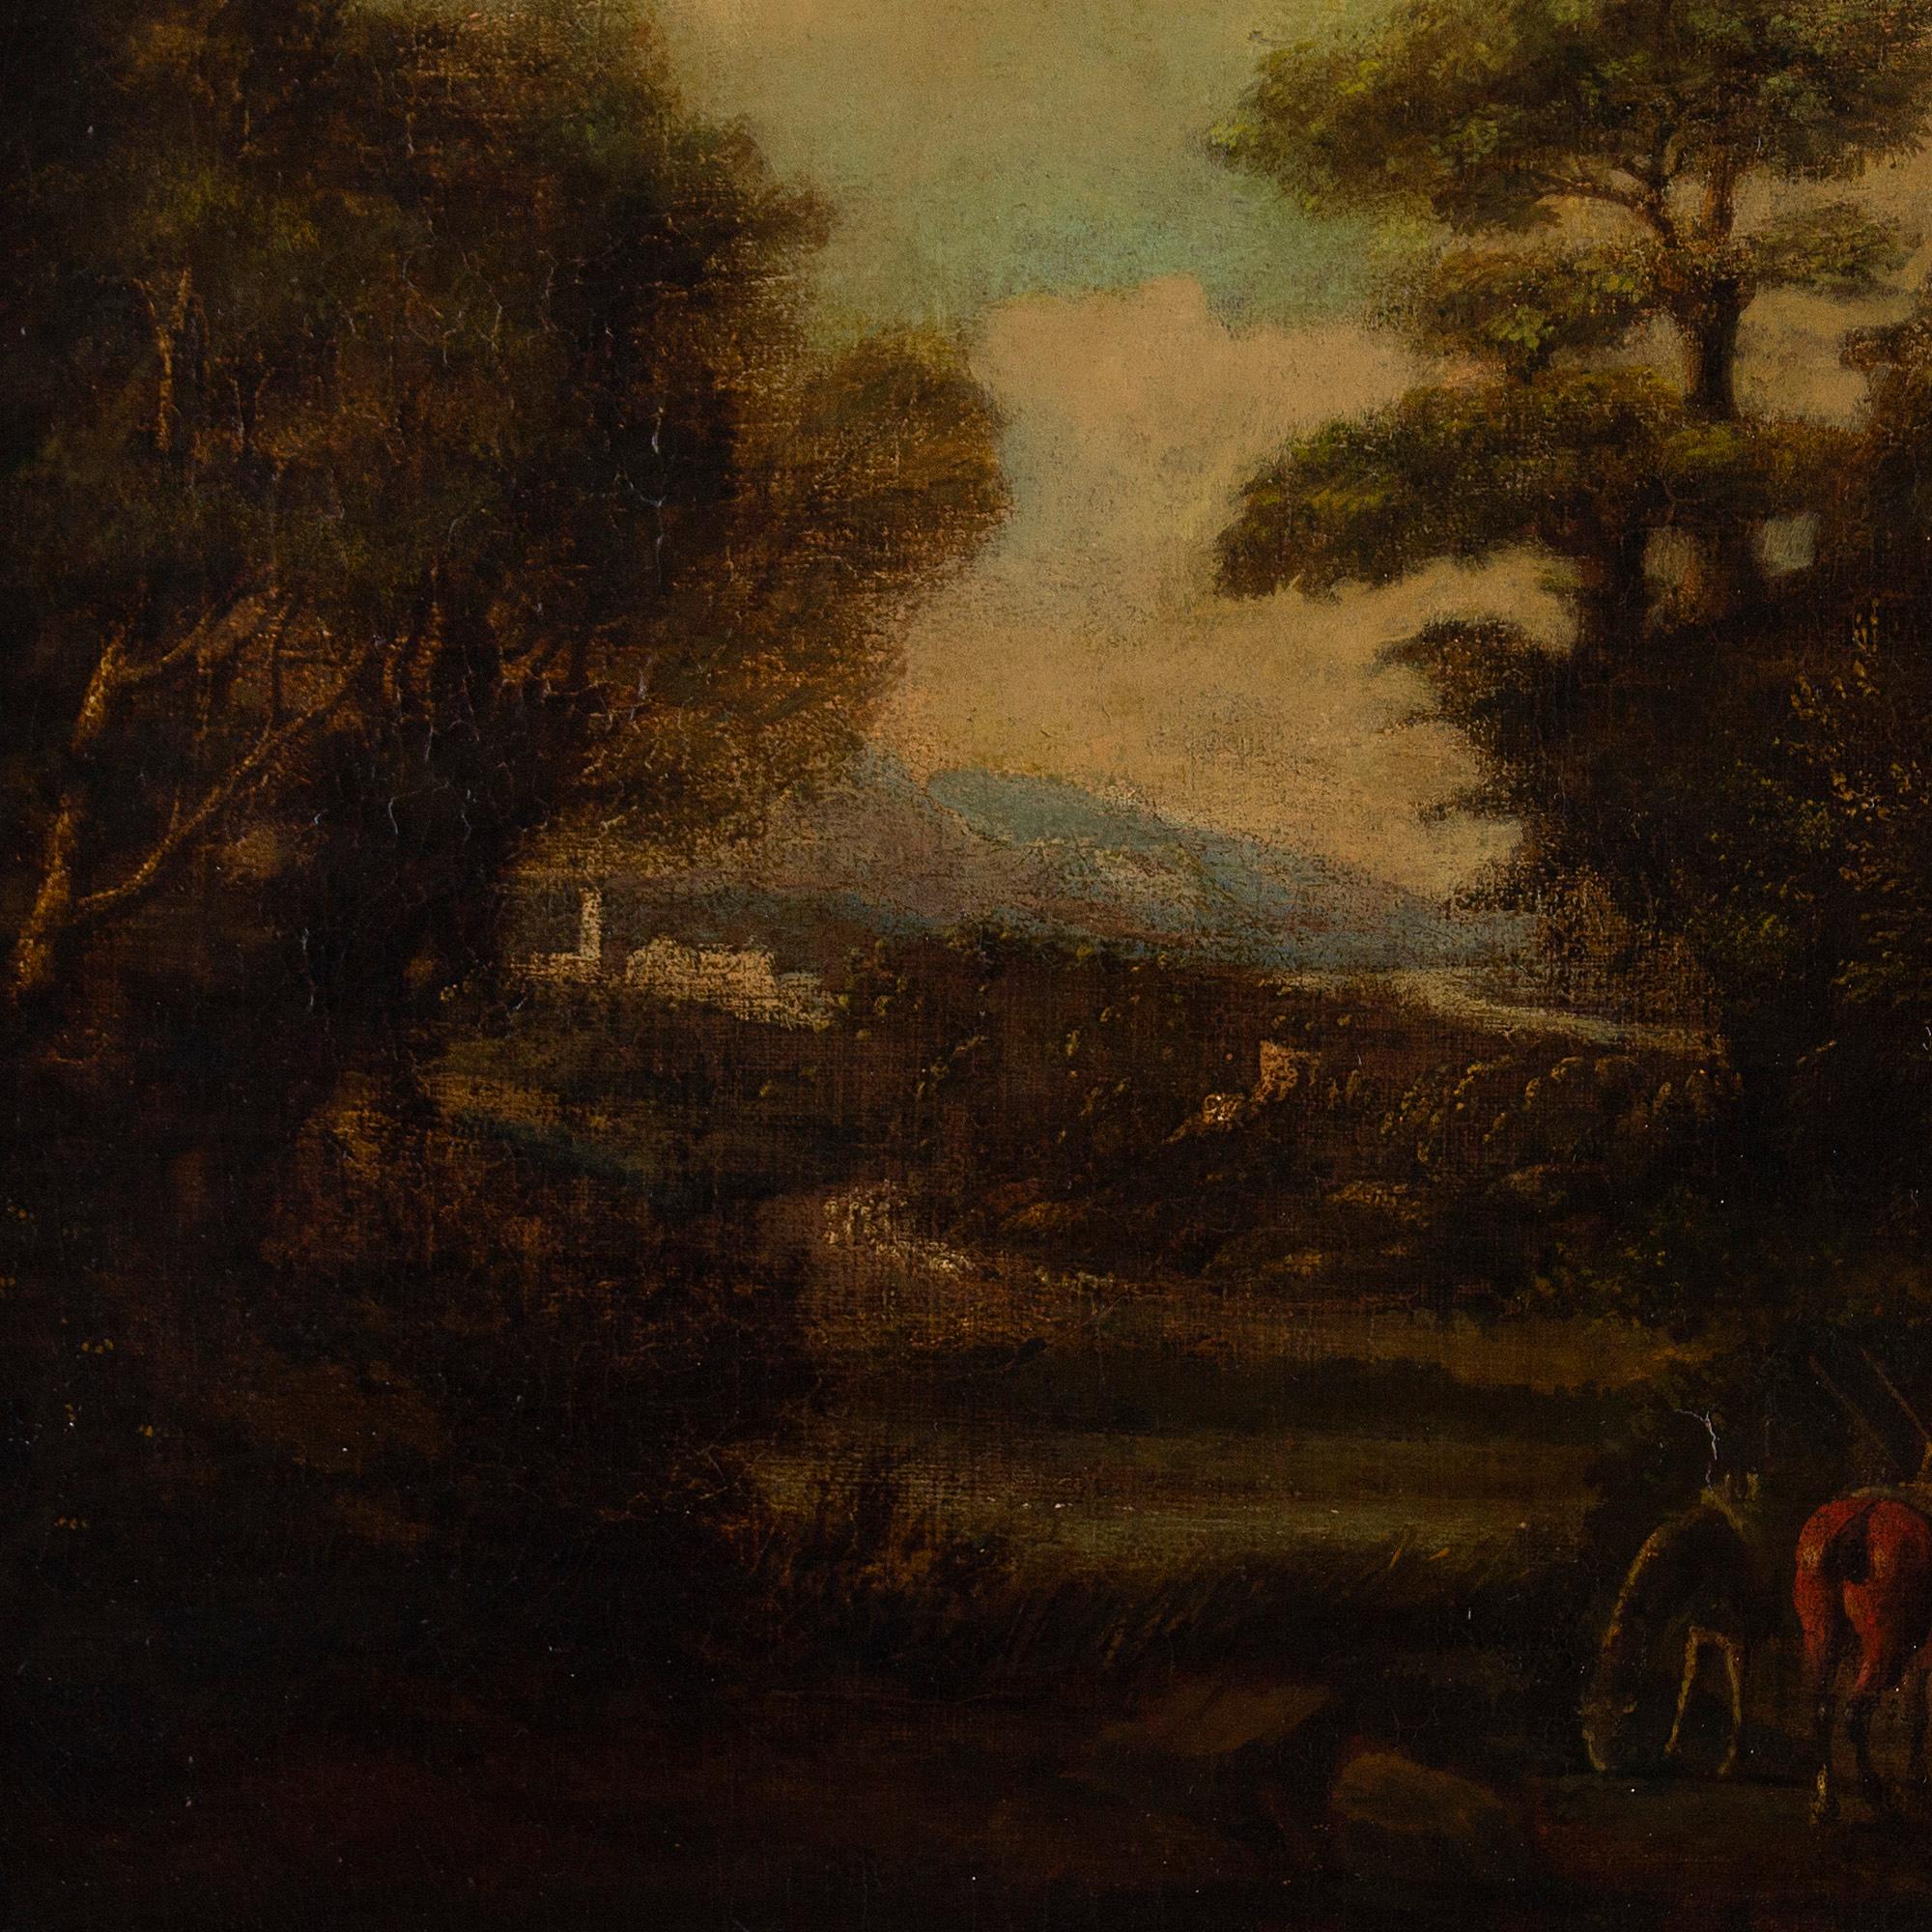 This attractive early 18th-century oil on canvas depicts several figures with horses before an idealised rural landscape with distant village.

The artist has drawn inspiration from the imagined landscapes of French baroque painters, particularly